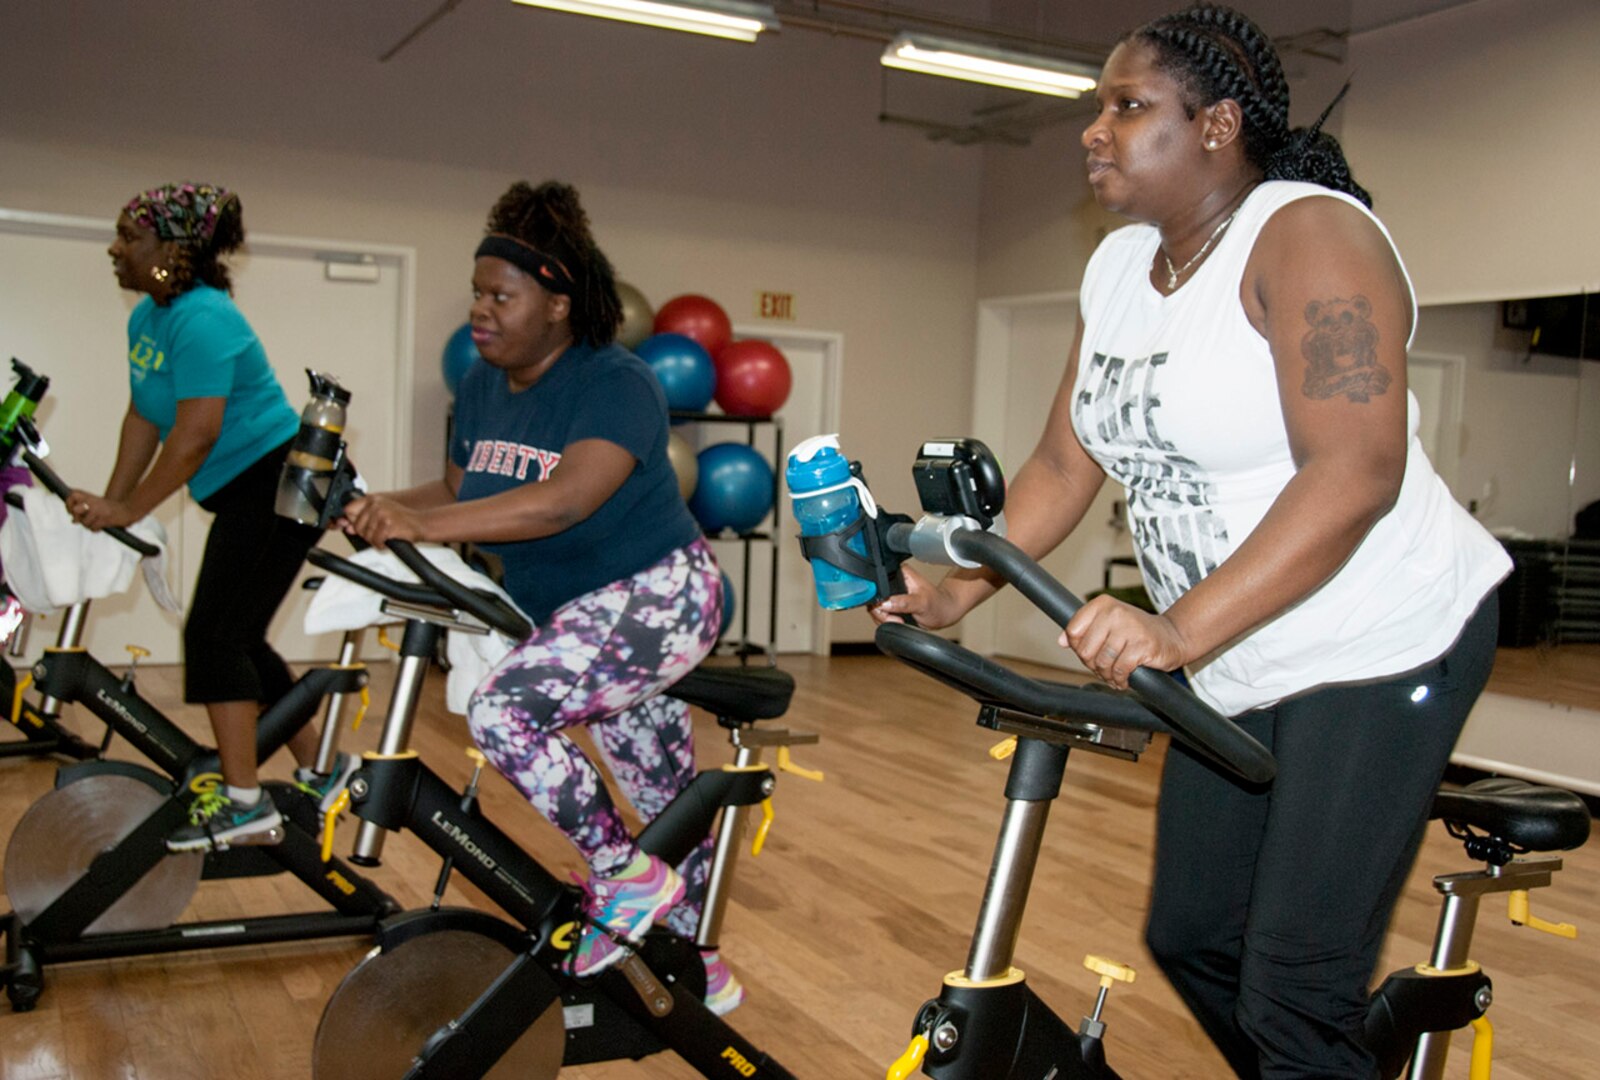 Ahawana Williams, Anita Elum-Mason and Ieshia Clark, all from DLA Installation Support, participate in a cycling class at the HQC Fitness Center. They are among more than 200 employees taking part in the 12-week Winter Warrior Challenge.